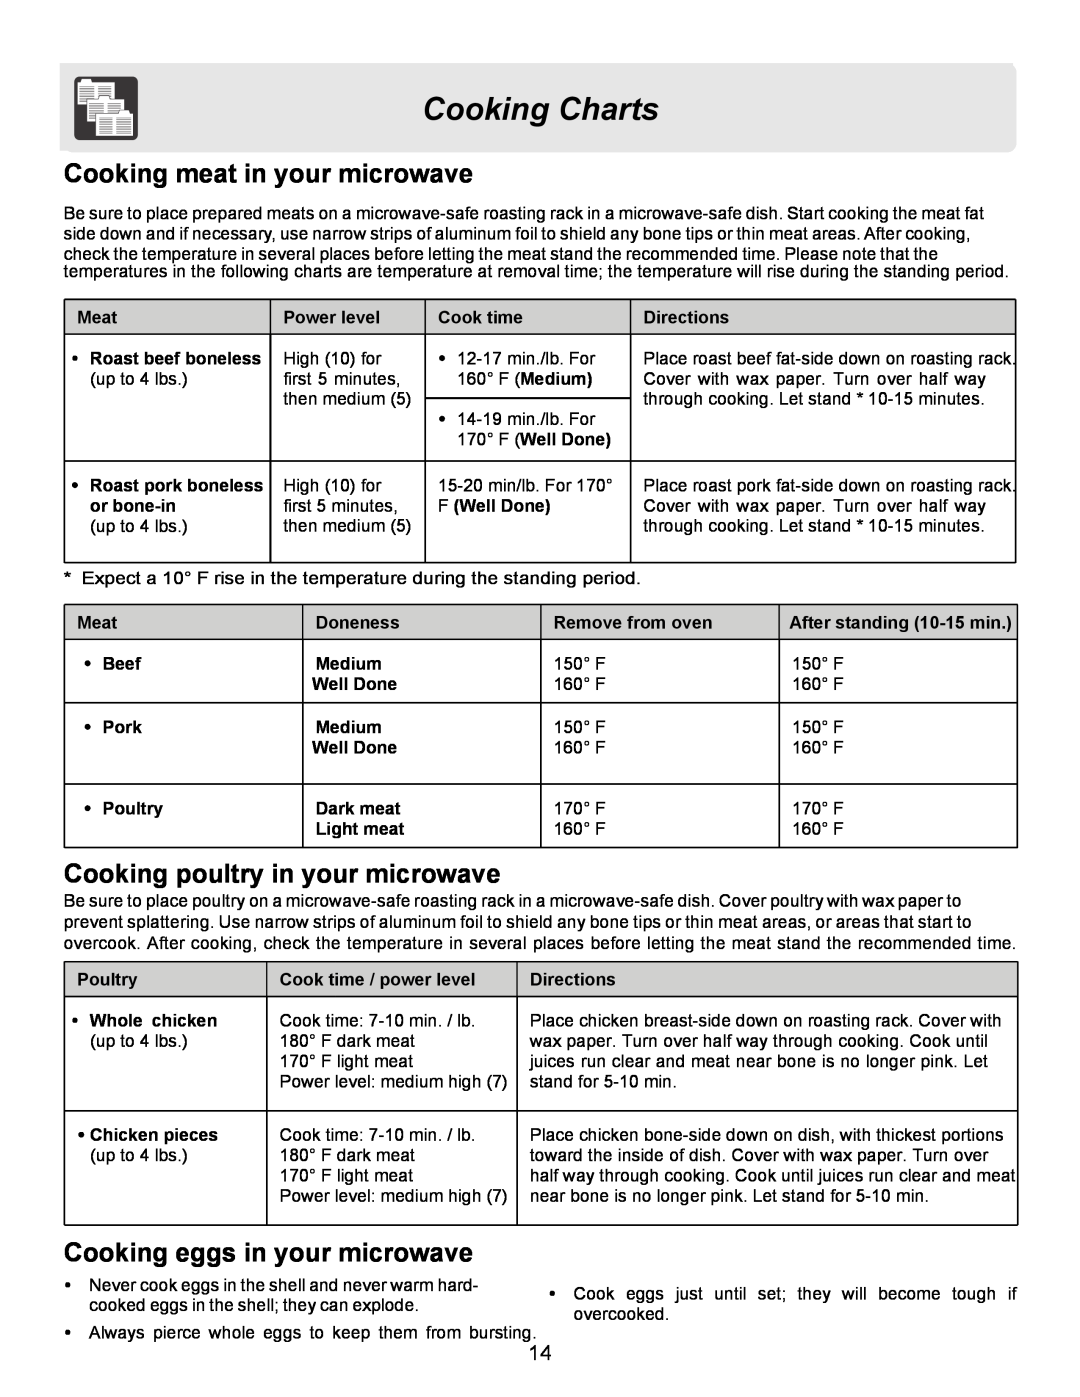 Frigidaire FFCE1431LW Cooking Charts, Cooking meat in your microwave, Cooking poultry in your microwave, Meat, Power level 